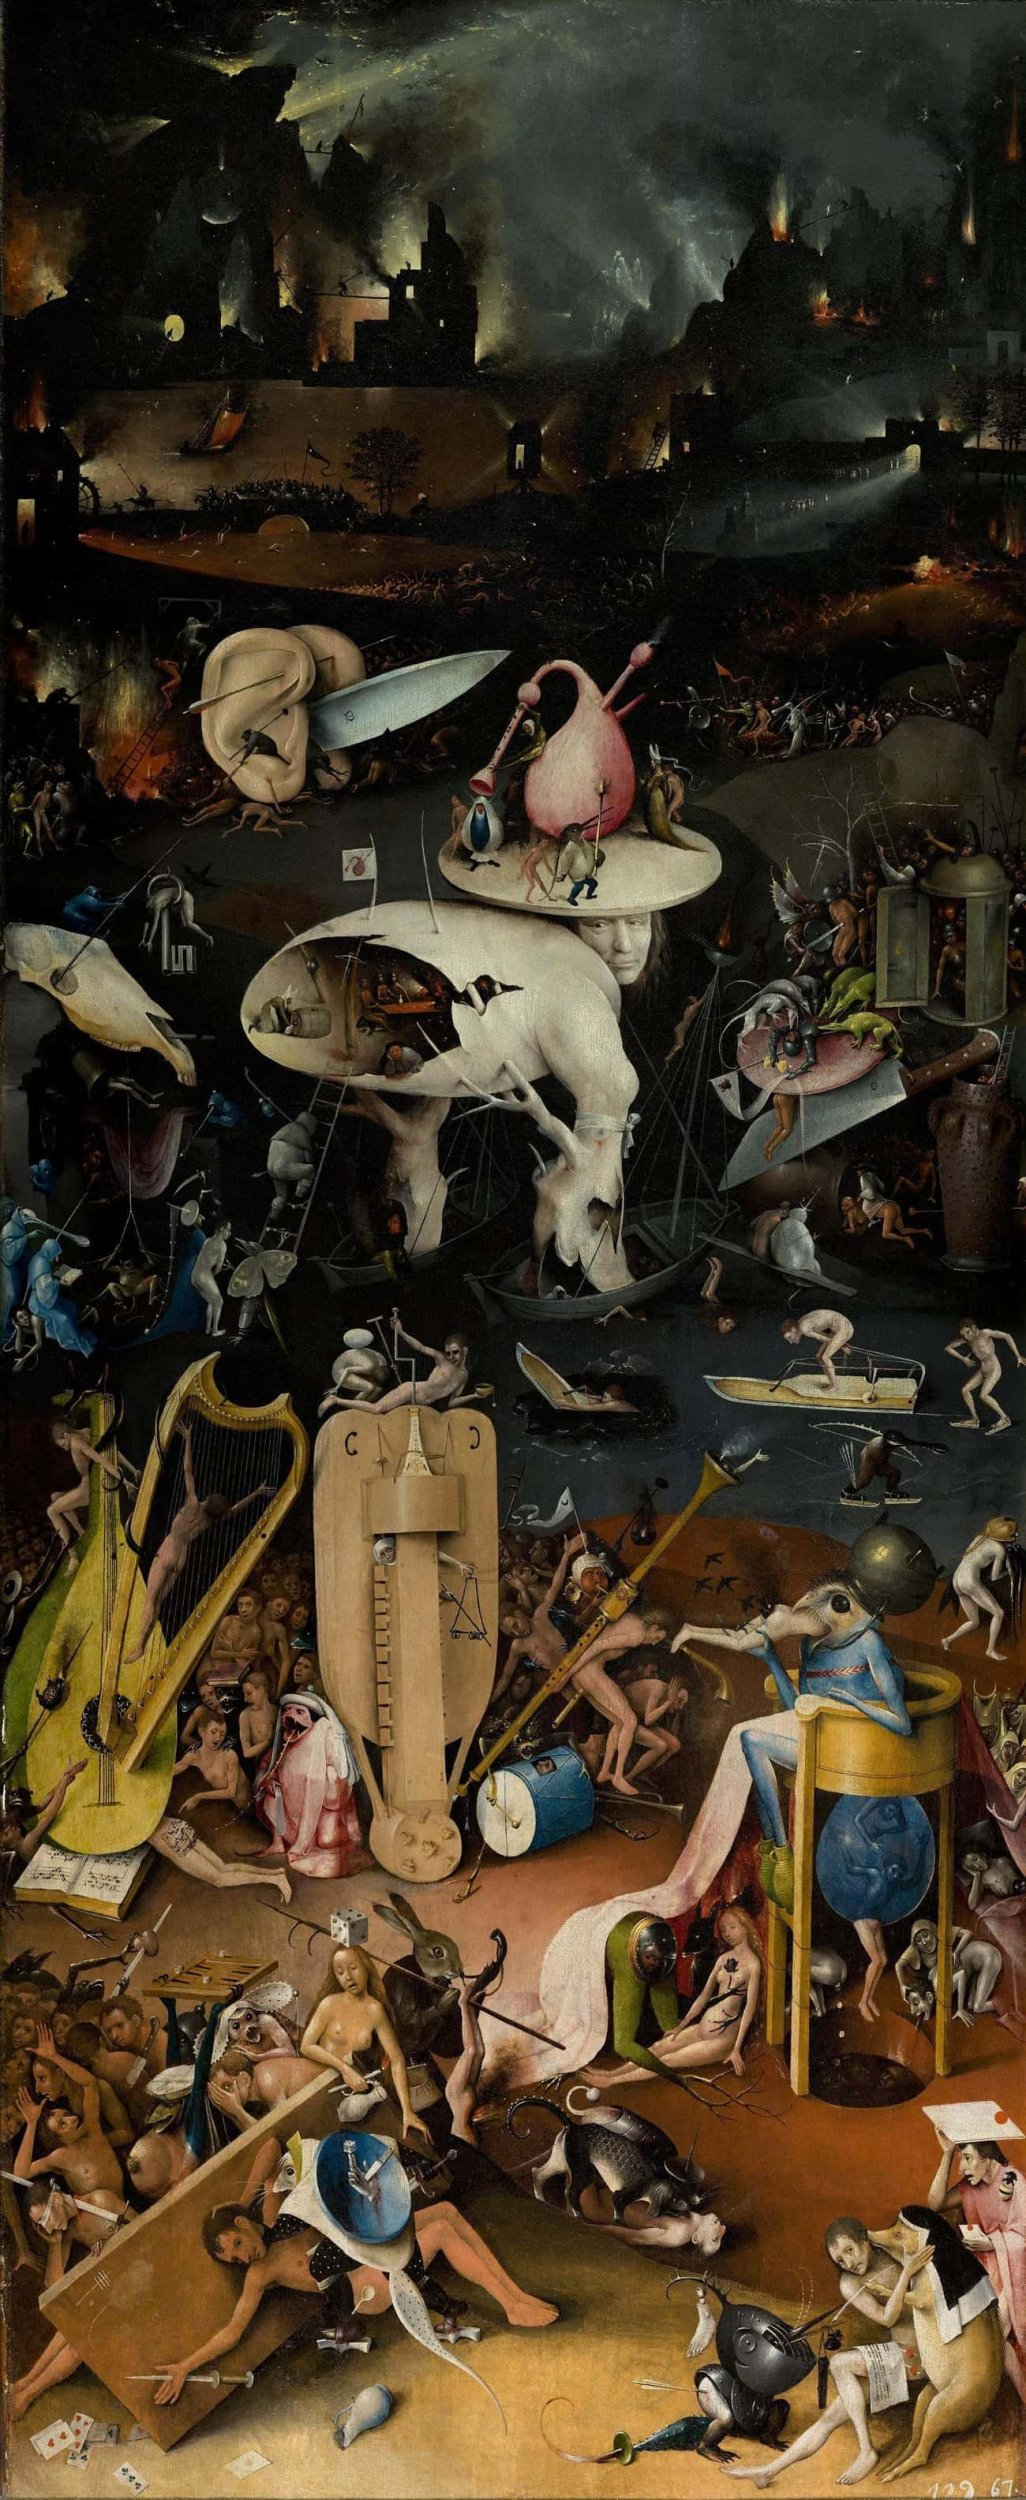 tle-the-garden-of-earthly-delights-hieronymus-bosch-1480-1505-photo-u1.jpeg